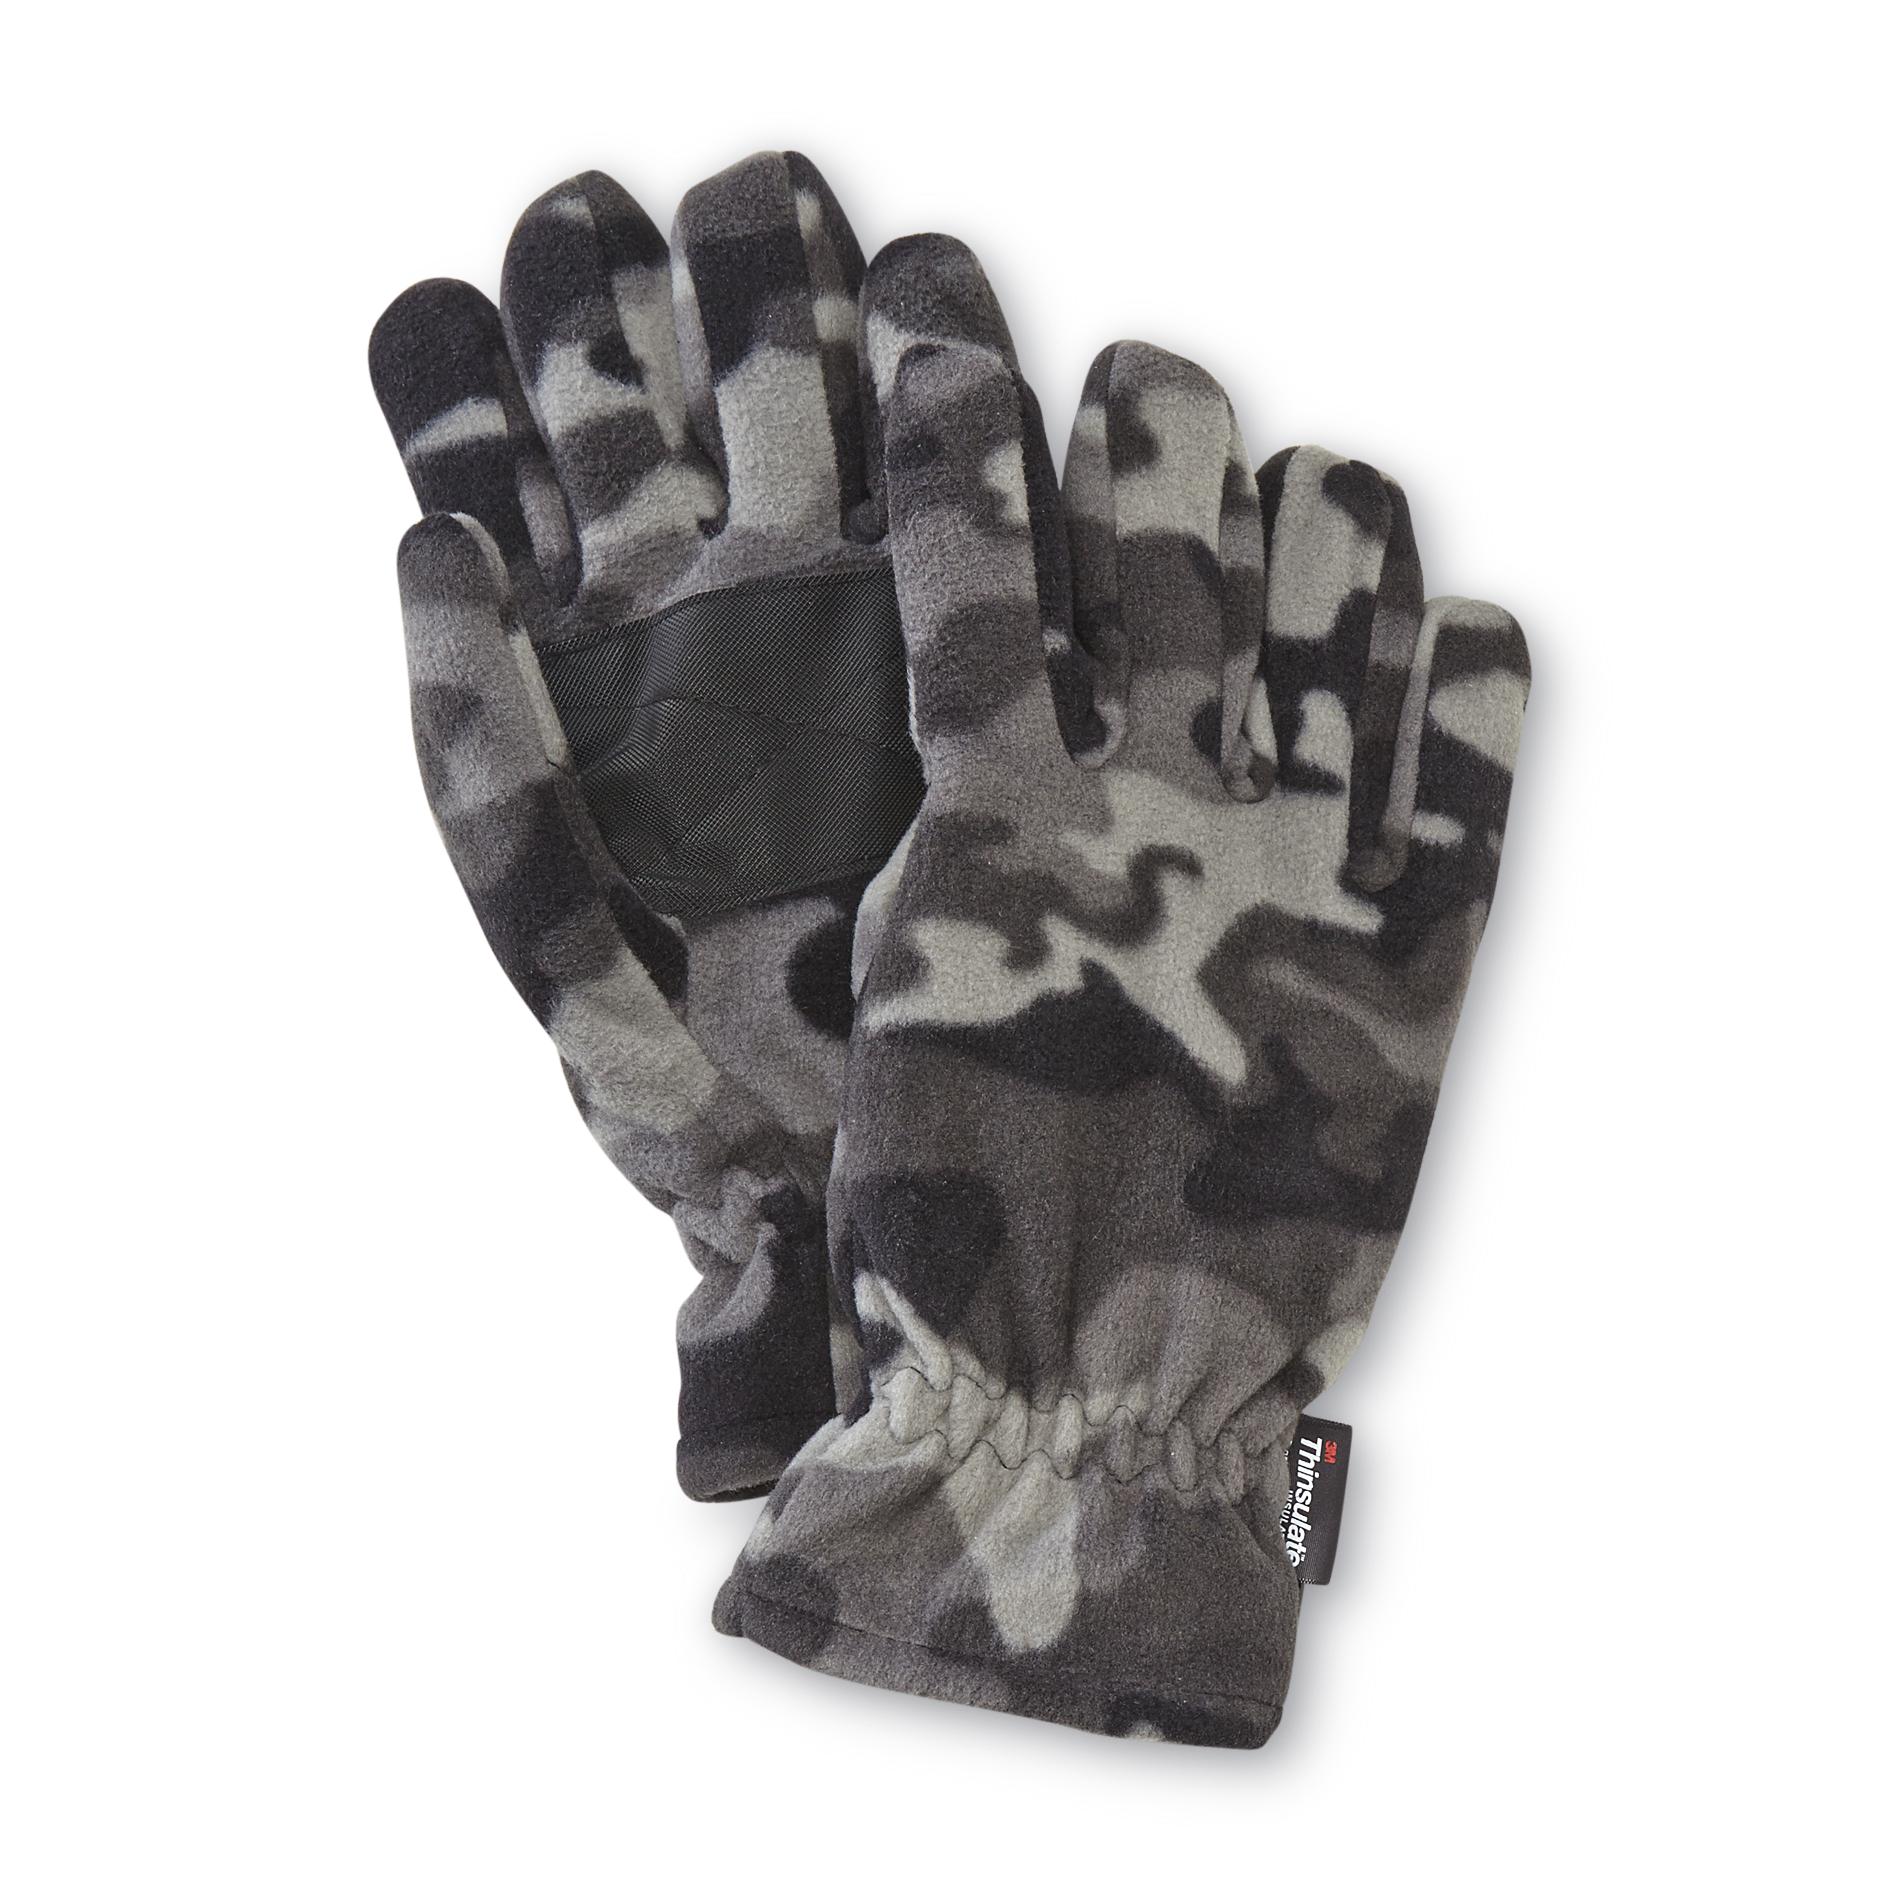 Athletech Men's Insulated Microfleece Gloves - Camouflage